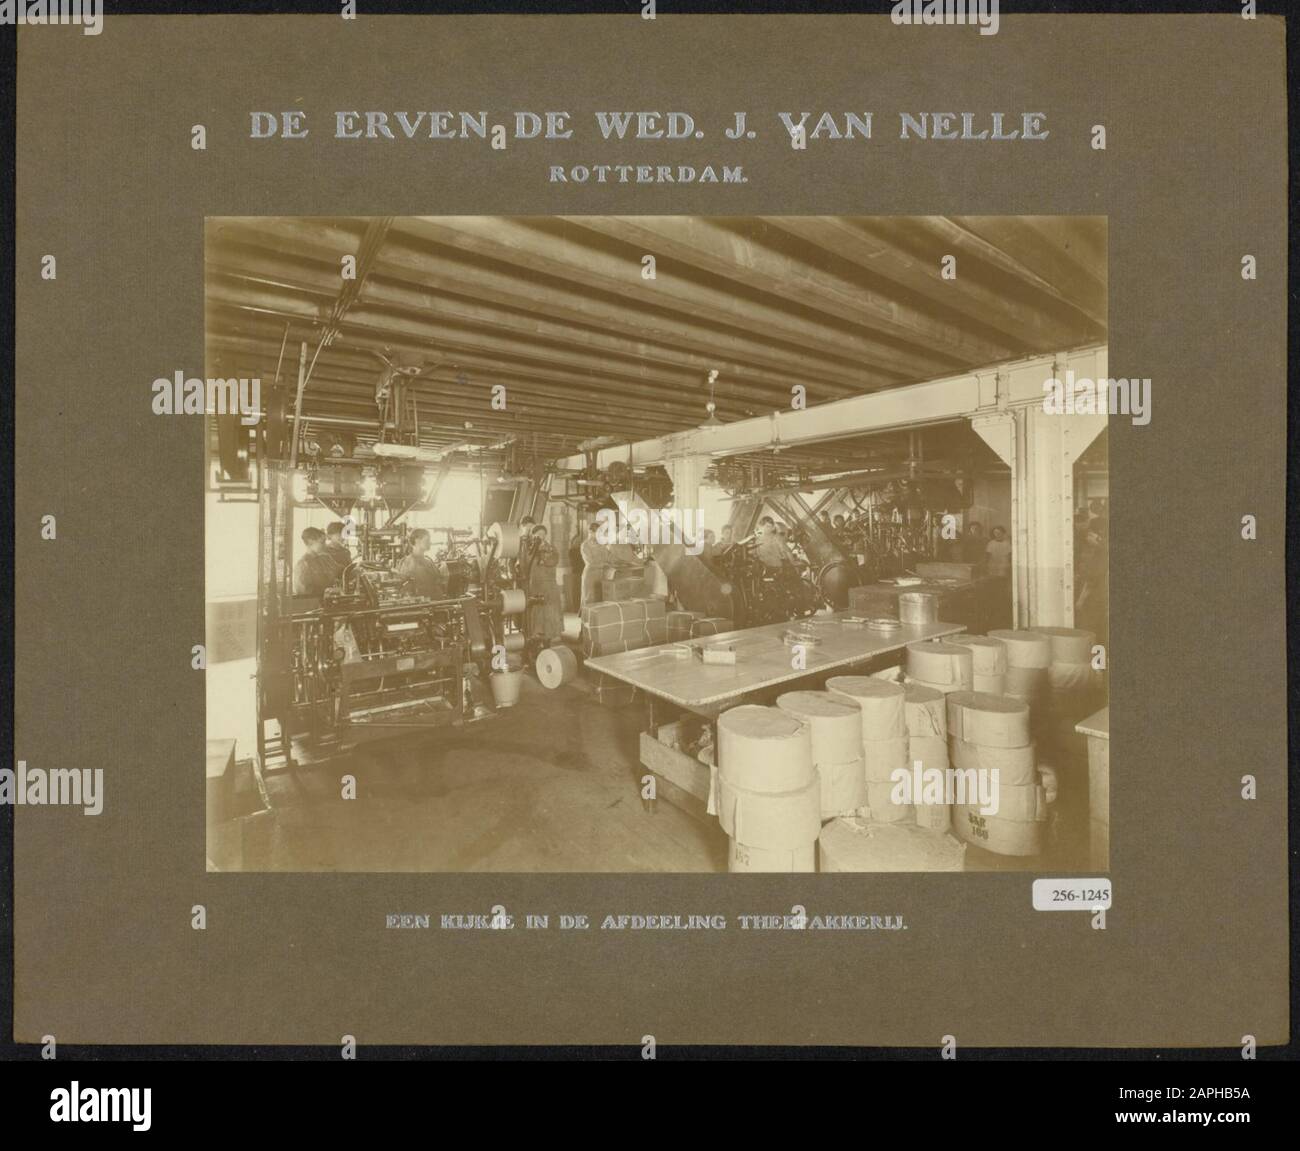 Description: The department of tea packing at the factory of the heirs the bet. J. van Nelle, Rotterdam. This is one of the photographs submitted by the Labour Inspectorate for the exhibition 'Education van den Jeugd over den school age', The Hague, July 16 - August 14, 1919 Date: Approximately 1919 Stock Photo